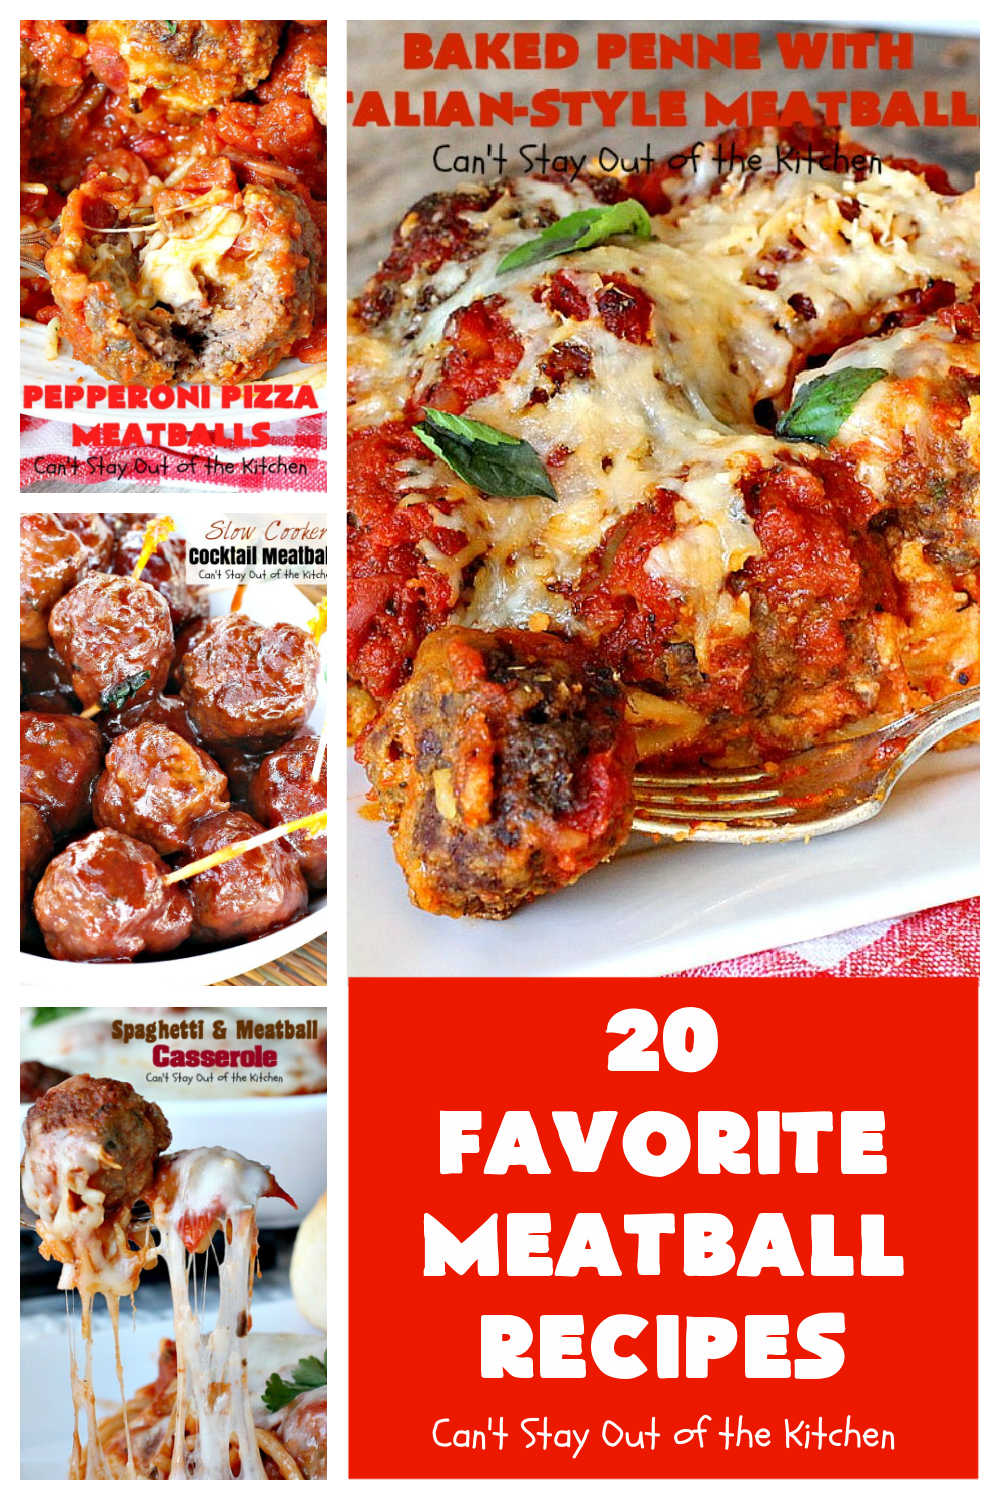 20 Favorite Meatball Recipes | Can't Stay Out of the Kitchen | #appetizers, #sliders & #sandwiches & lots of different ways to enjoy #meatballs without every version being #SpaghettiAndMeatballs! #beef #20FavoriteMeatballRecipes #MeatballRecipes